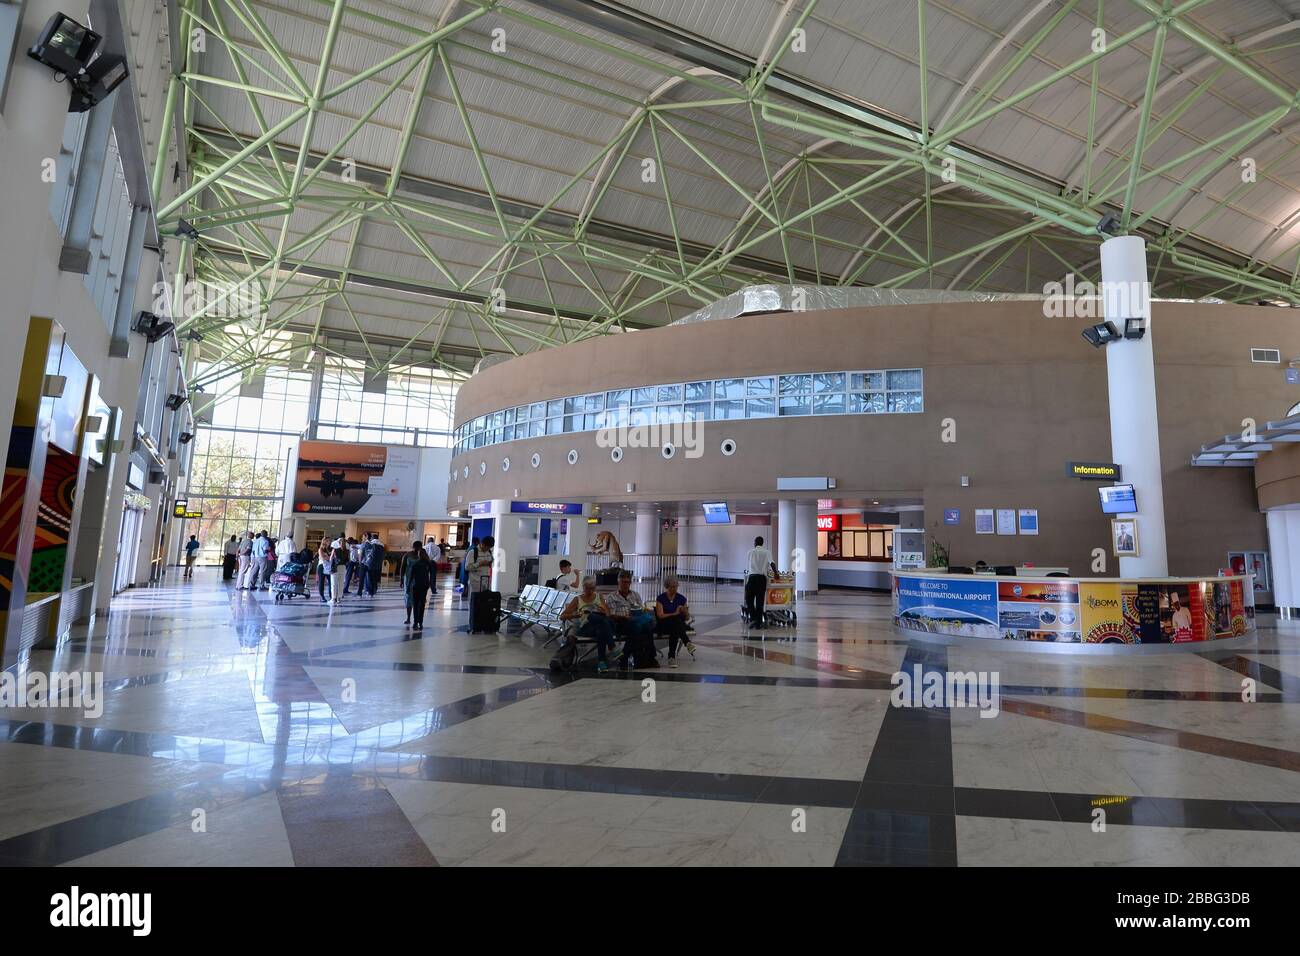 Interior view of Victoria Falls Airport new passengers terminal inaugurated in 2016. Airport facilities in touristic area of Zimbabwe. Stock Photo